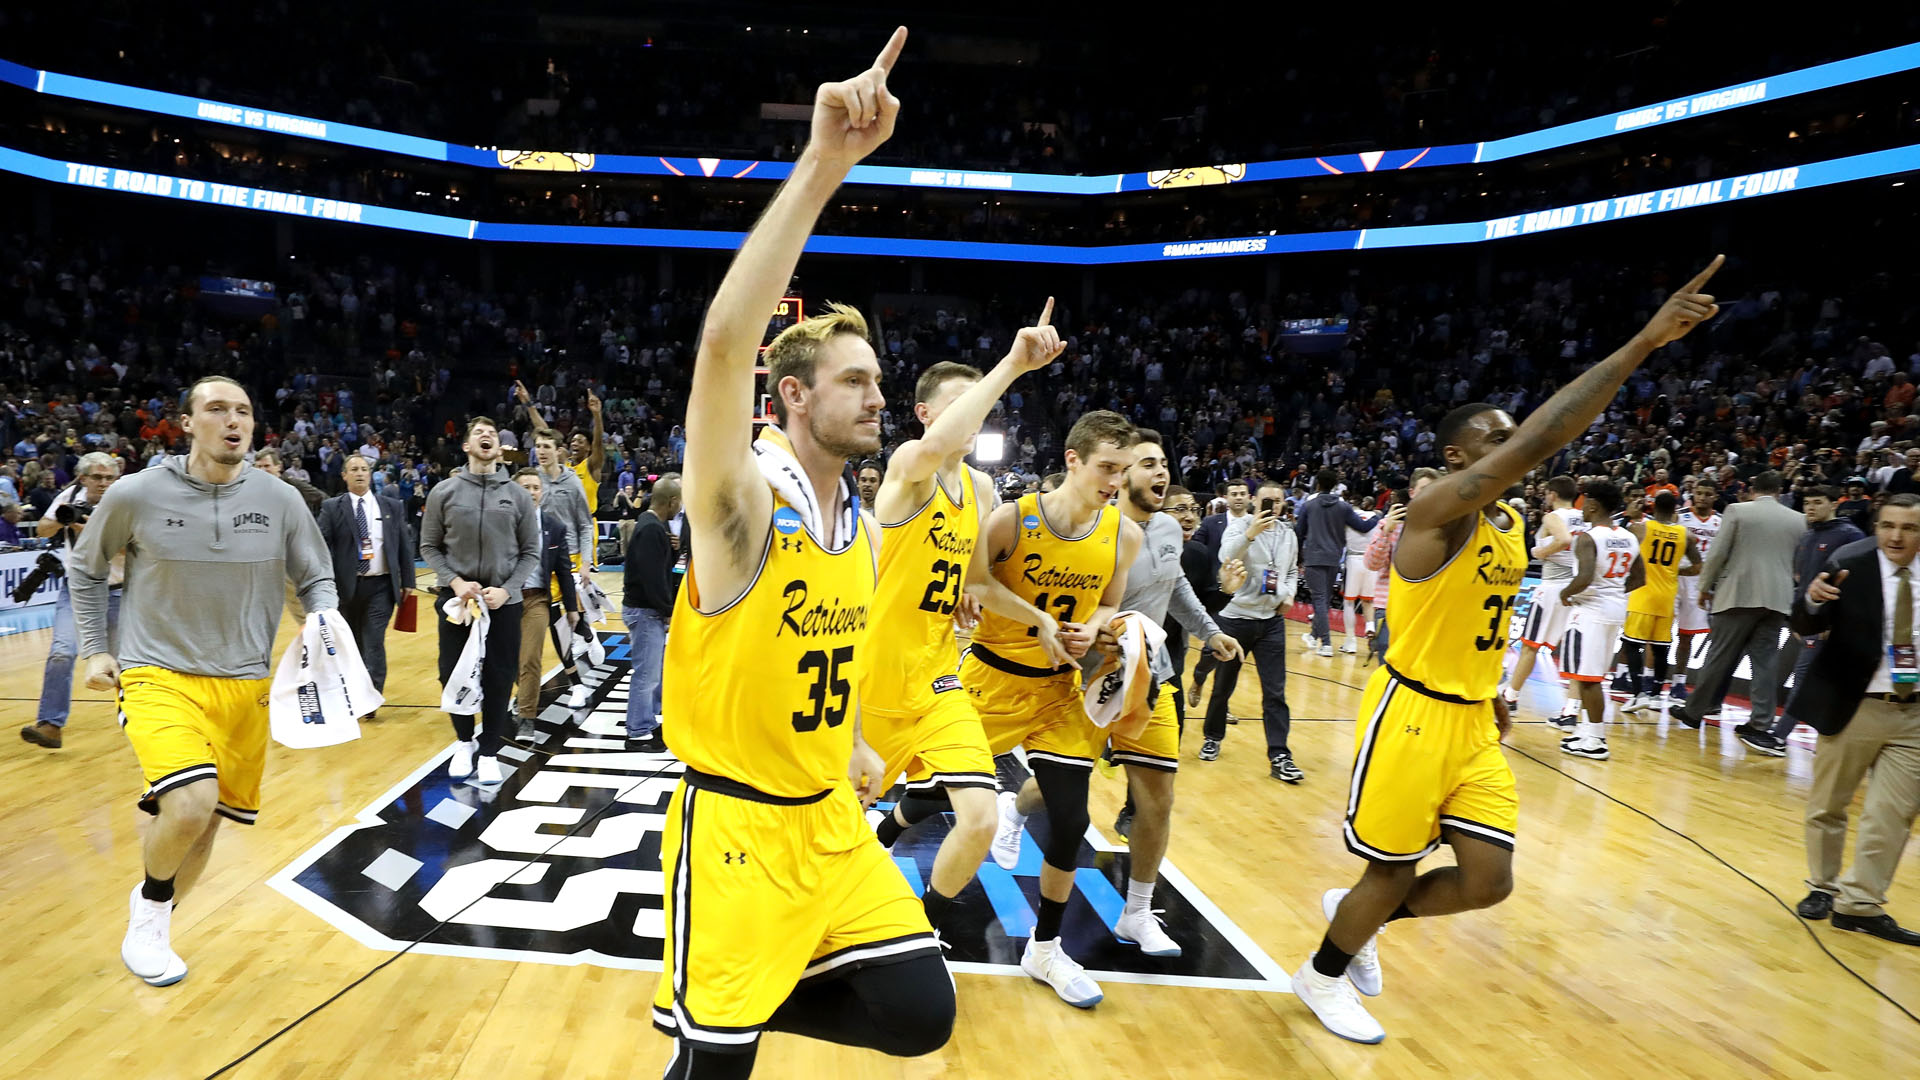 March Madness 2018: UMBC's win earns everyone in U.S. free pizza | NCAA